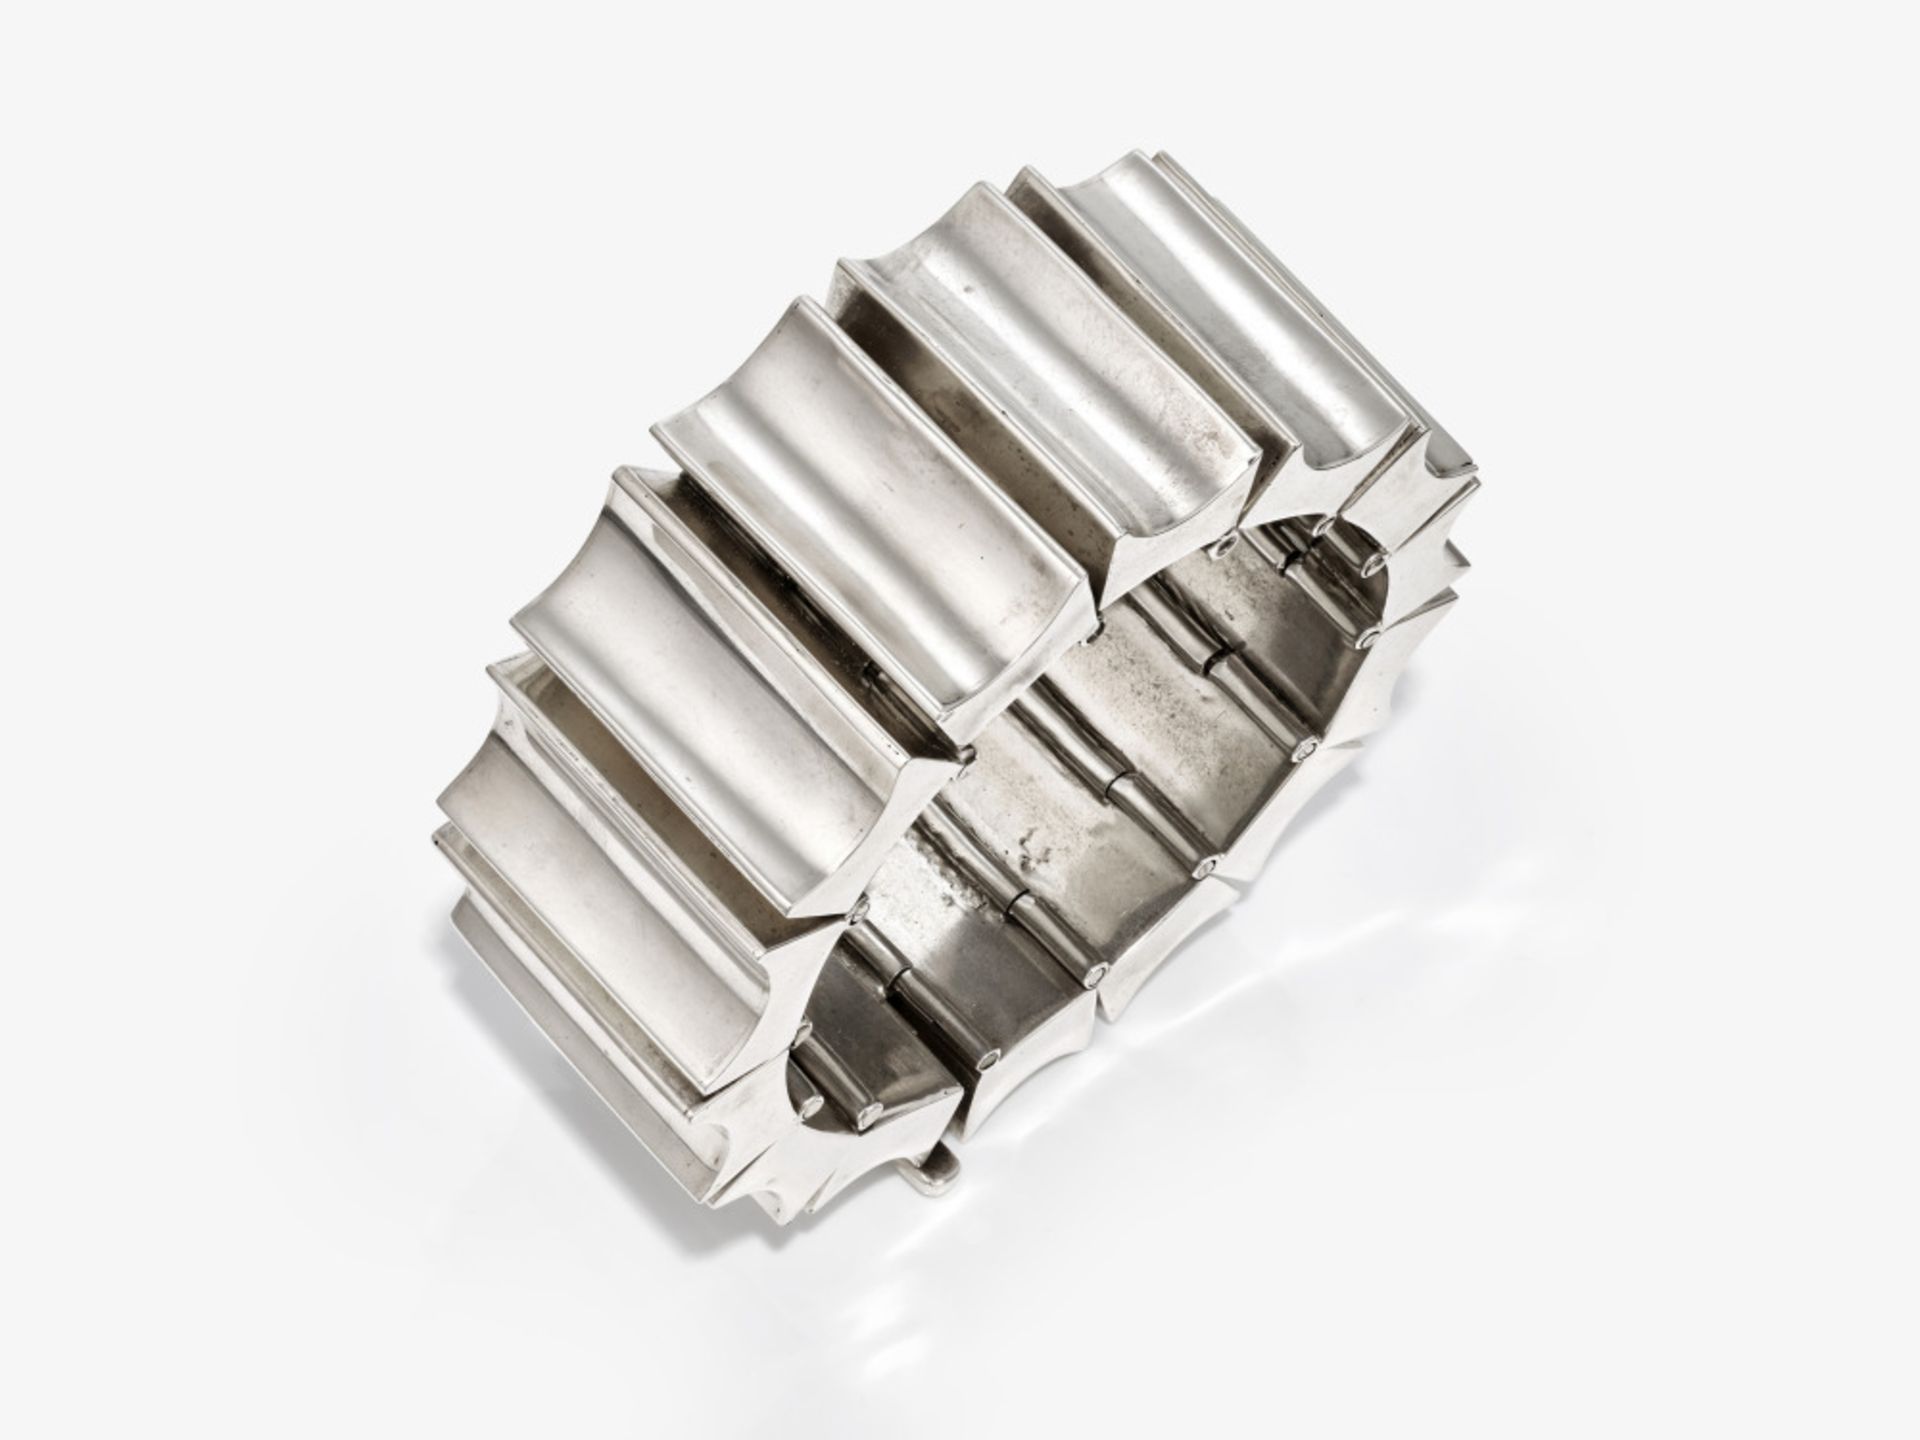 A vintage bracelet with ring made of high-gloss sterling silver - Mexico, Taxco, 1960s - 1970s - Image 2 of 3